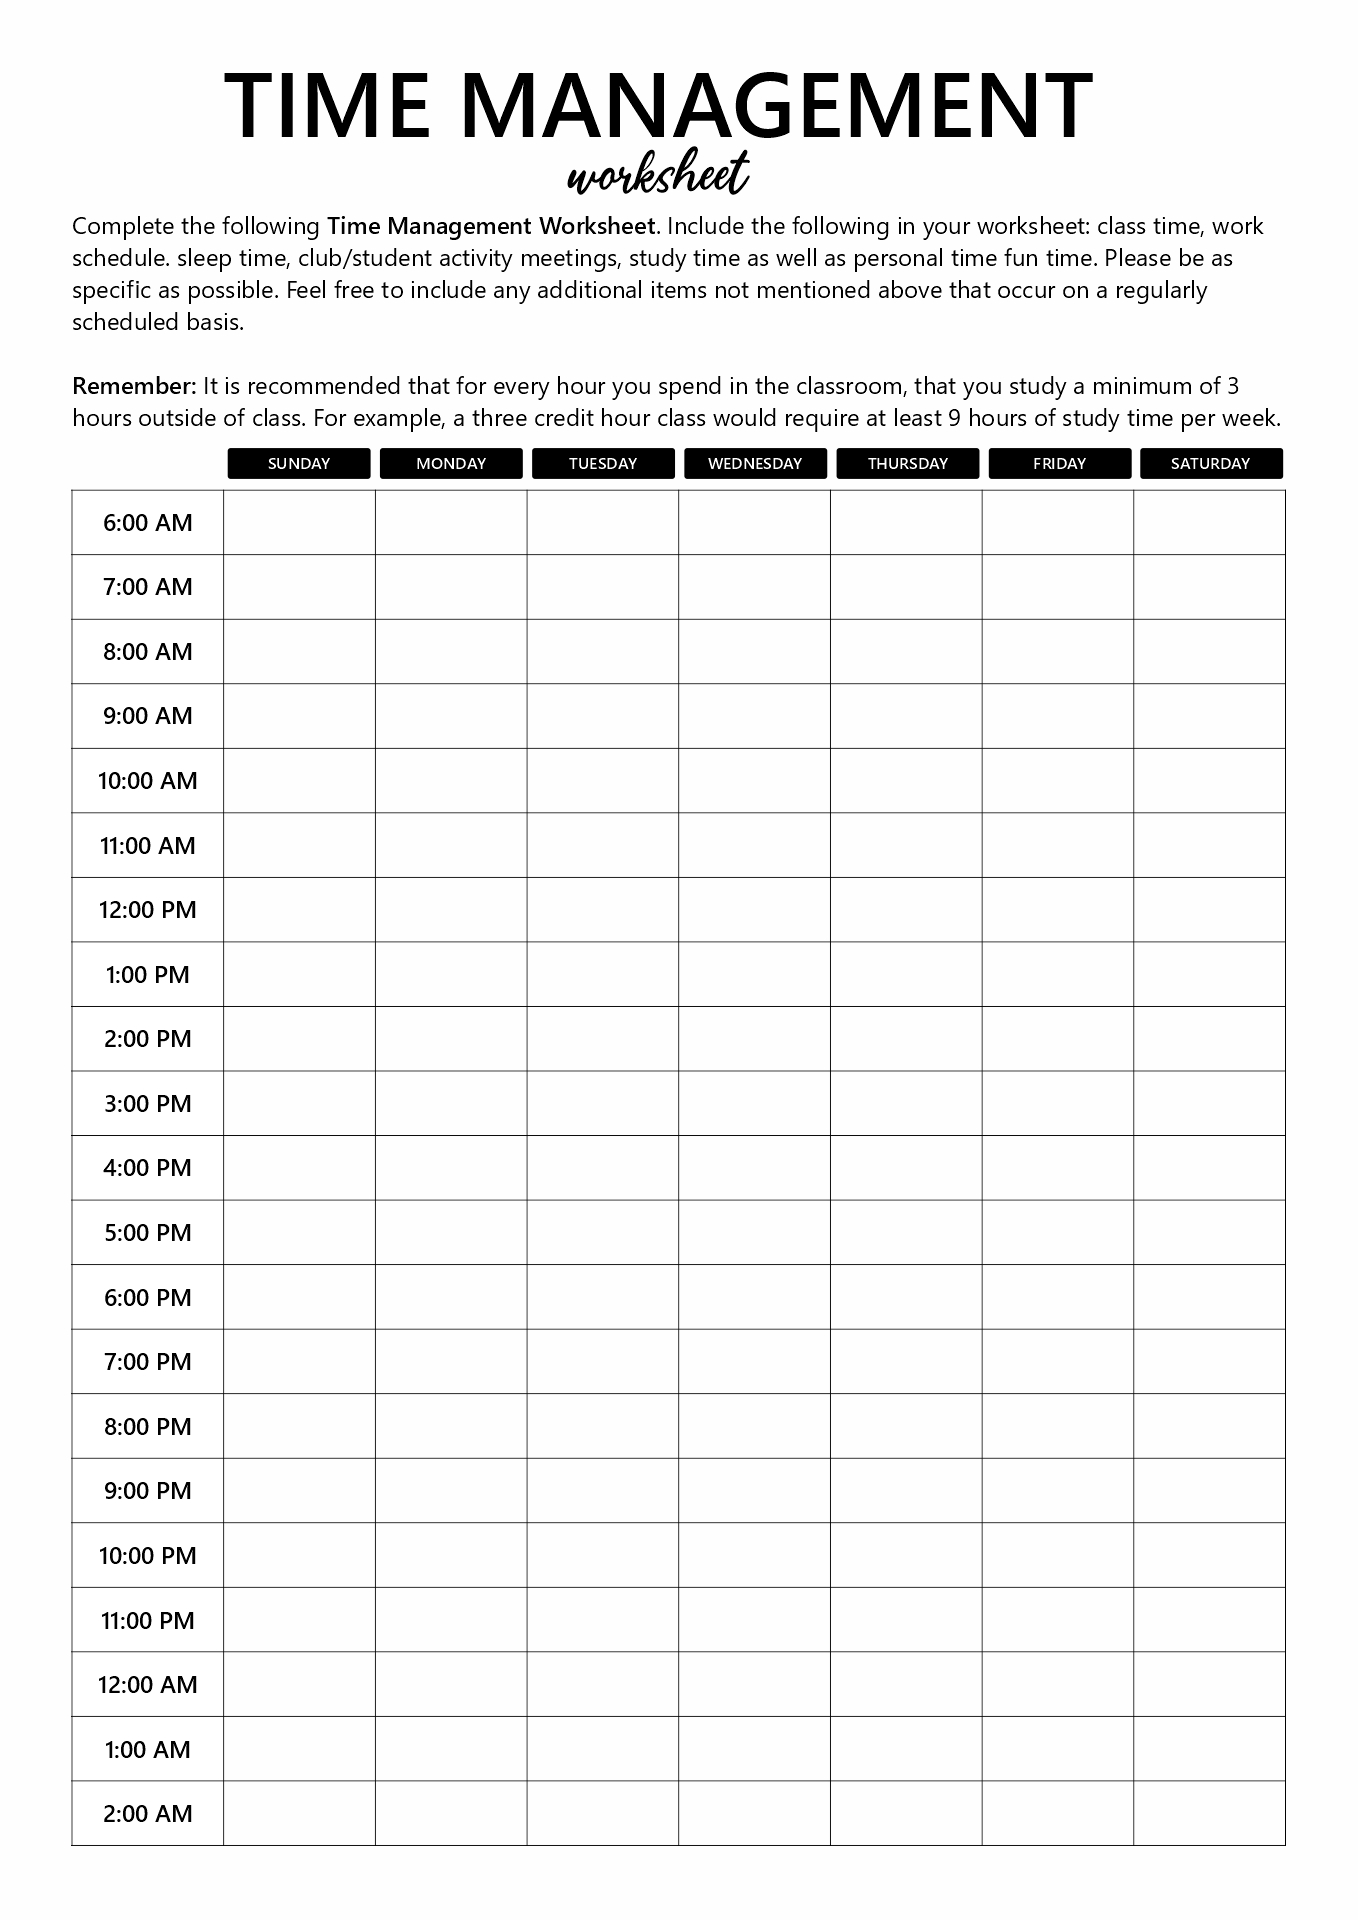 18-best-images-of-time-management-schedule-worksheets-free-time